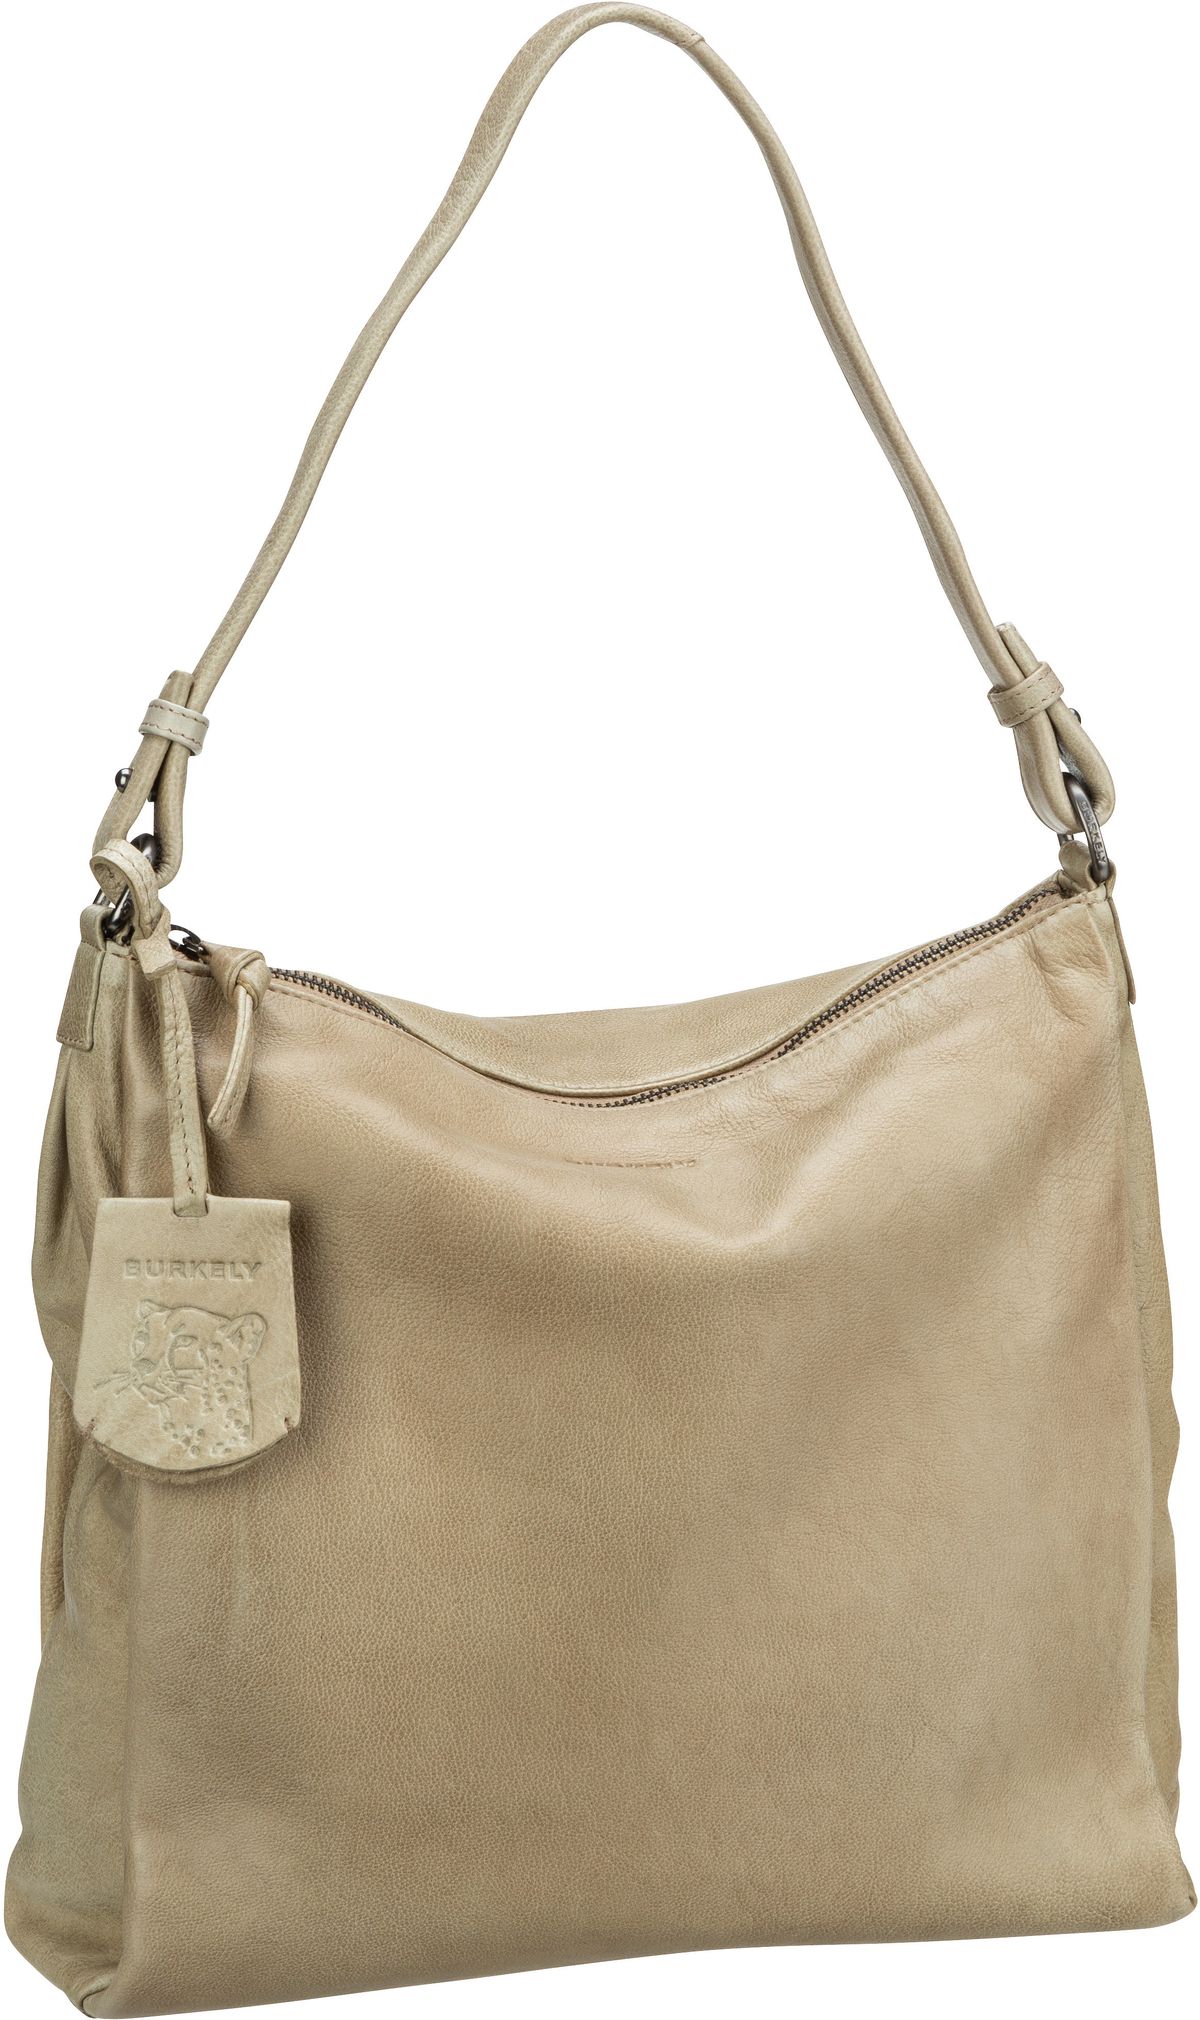 Burkely Just Jolie Hobo - Light Taupe